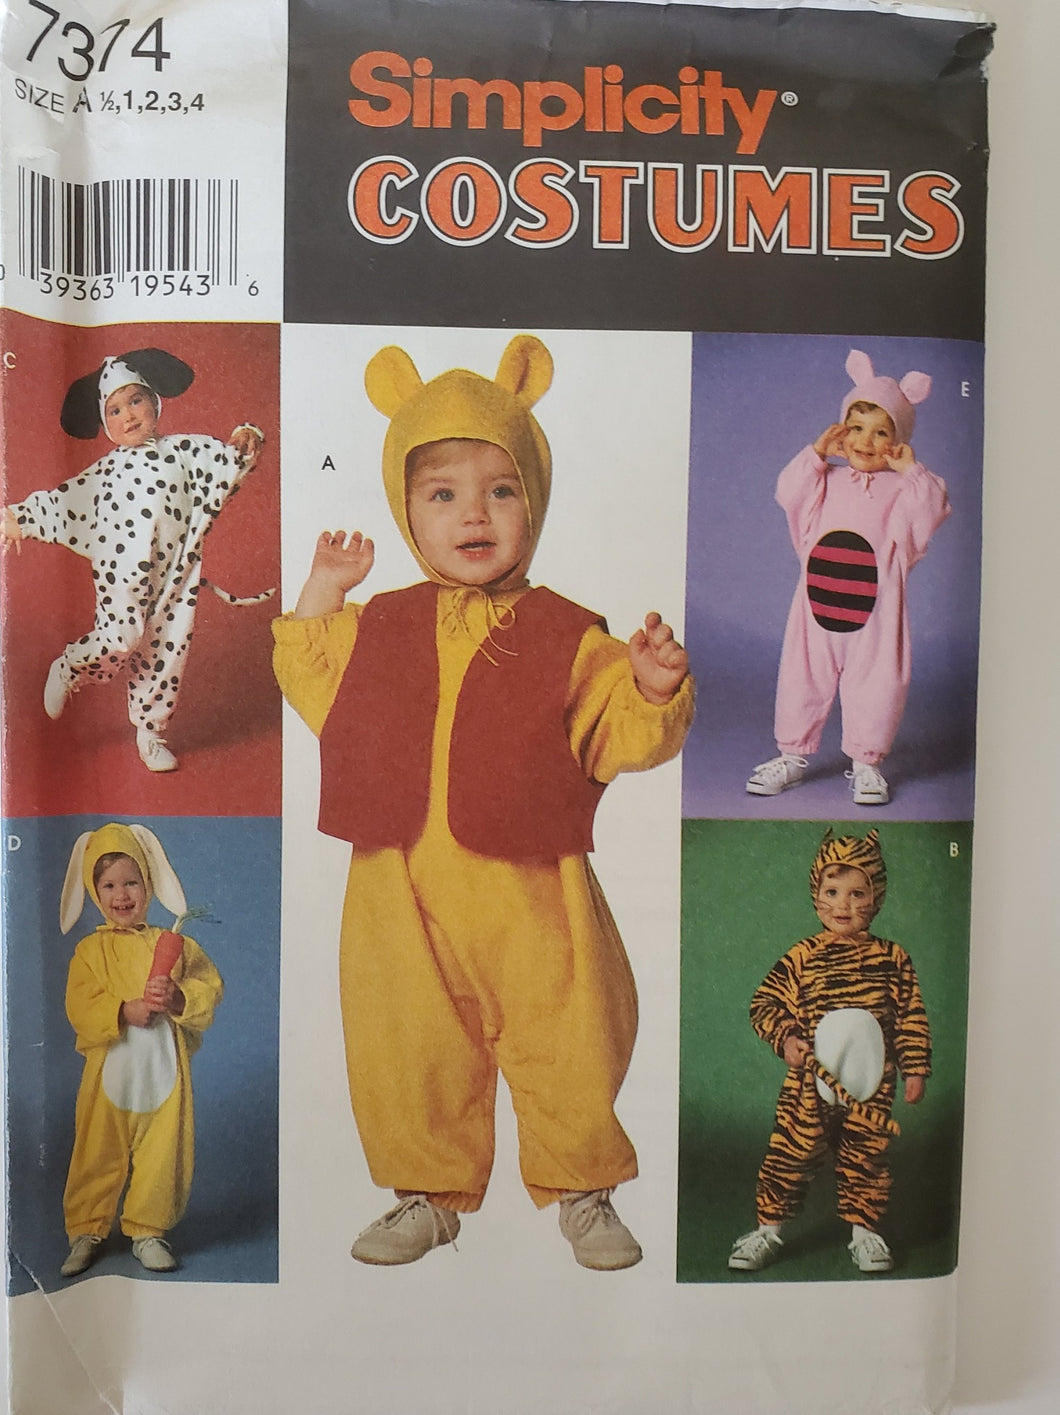 Simplicity 7374 UNCUT, Boy's and Girl's Animal Costumes, Sizes 1/2-1-2-3-4, Vintage